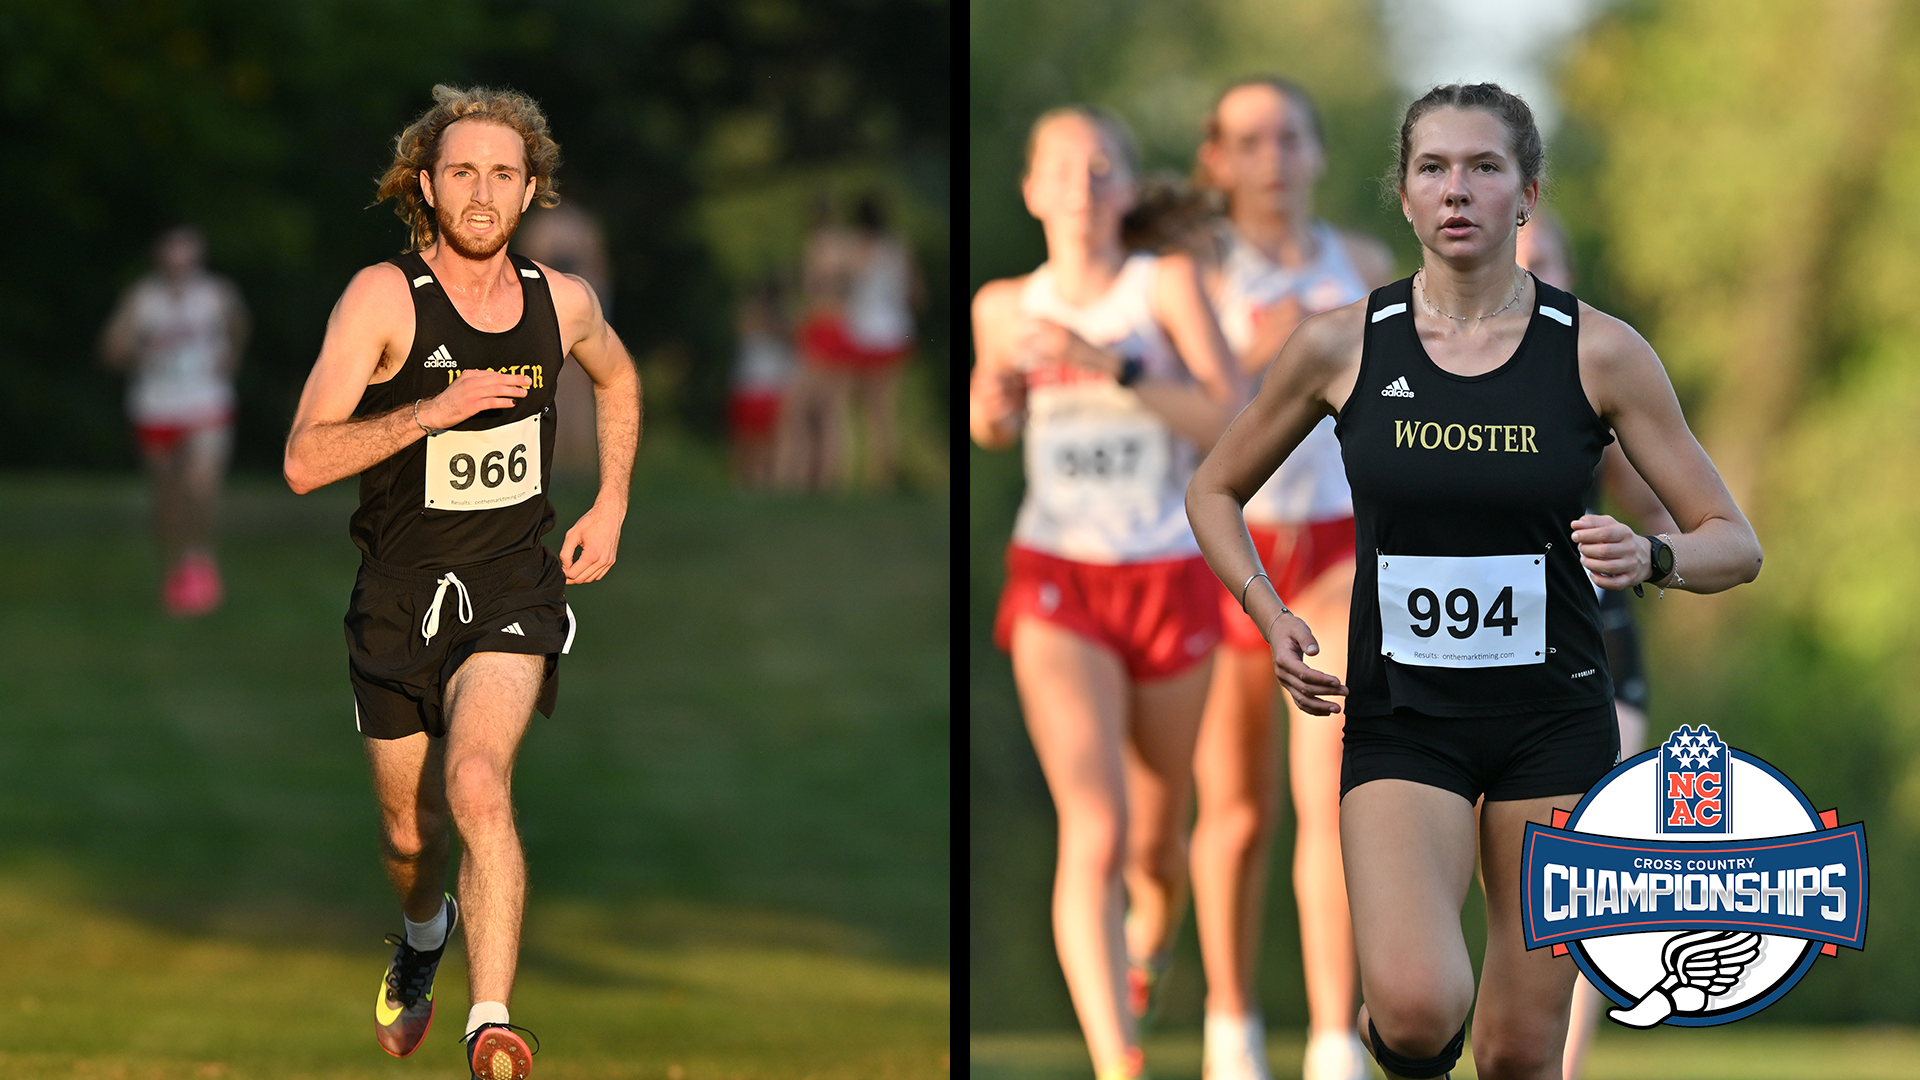 Eric Johnson, Amy Gabrovsek, Wooster Cross Country